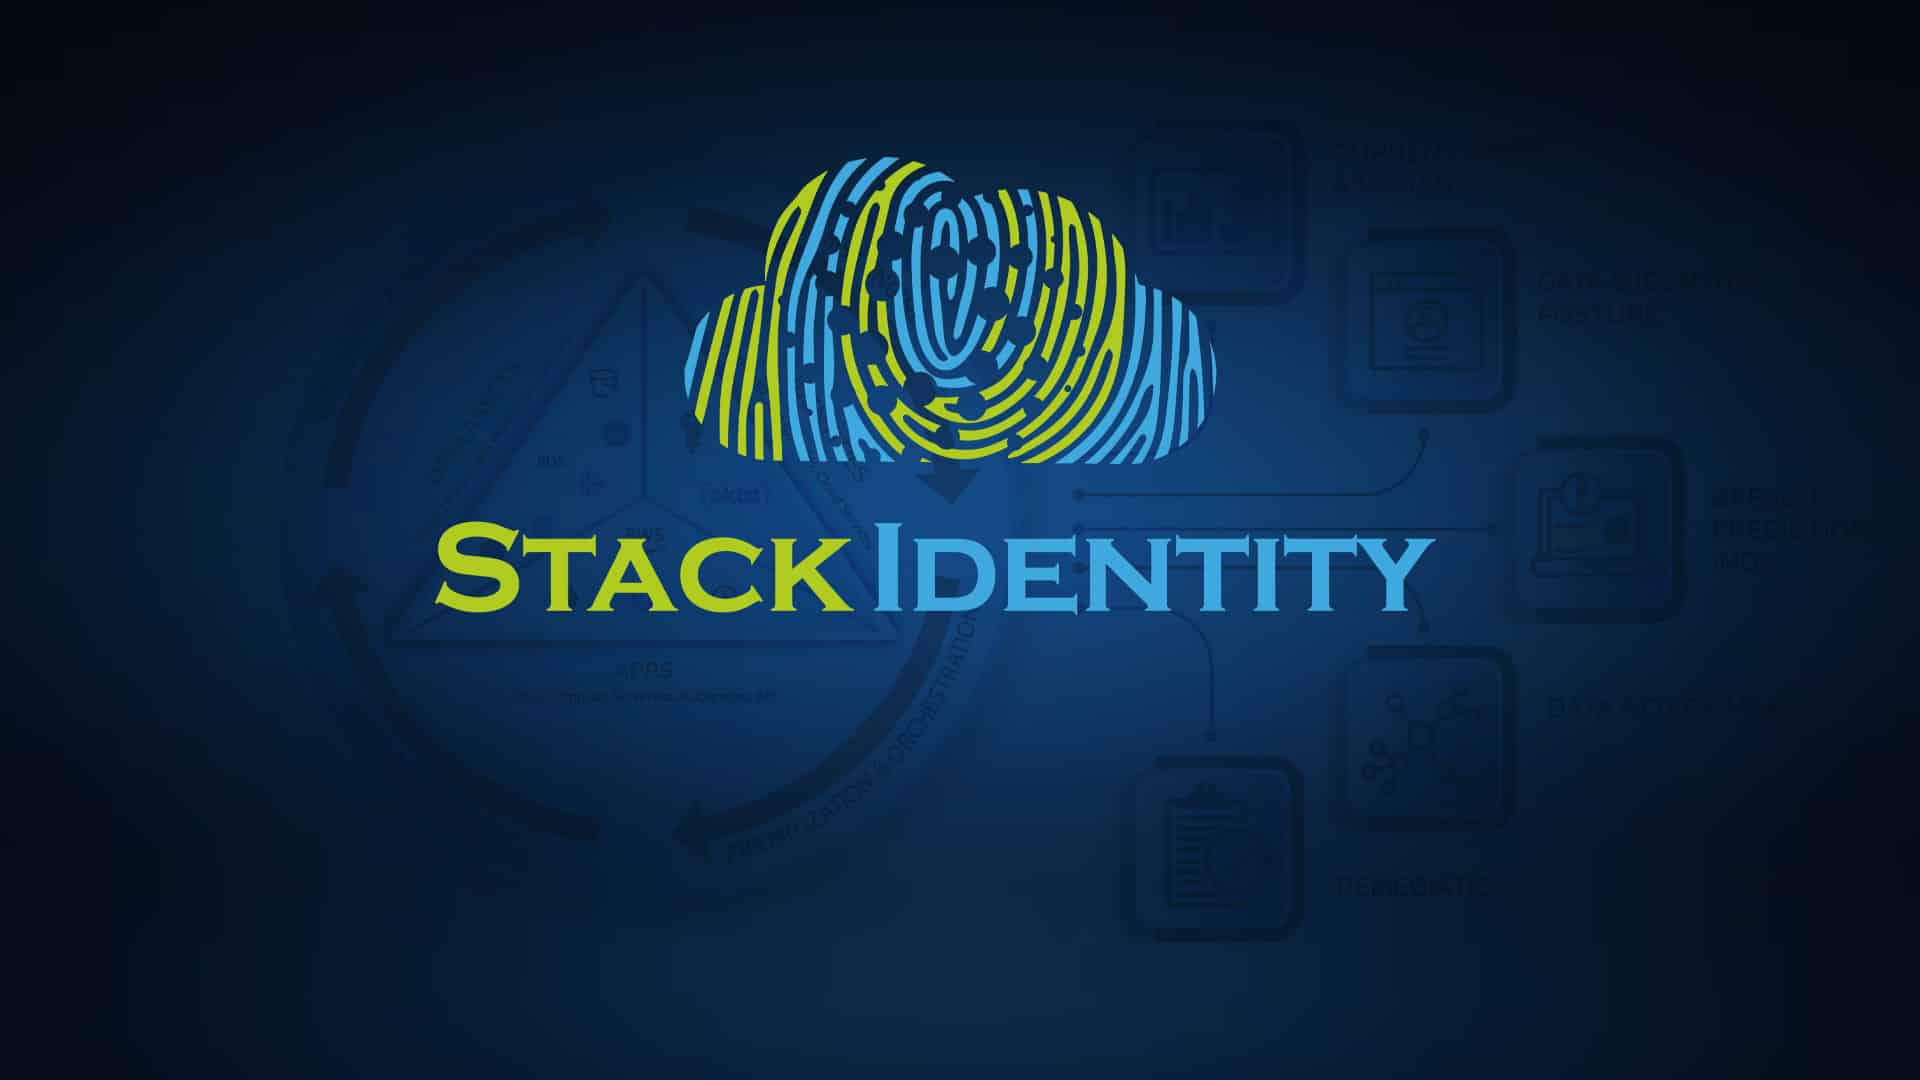 Stack Identity Raises USD 4M Seed Funding to Solve Biggest IAM Operations Problem of 'Shadow Access' for Enterprises